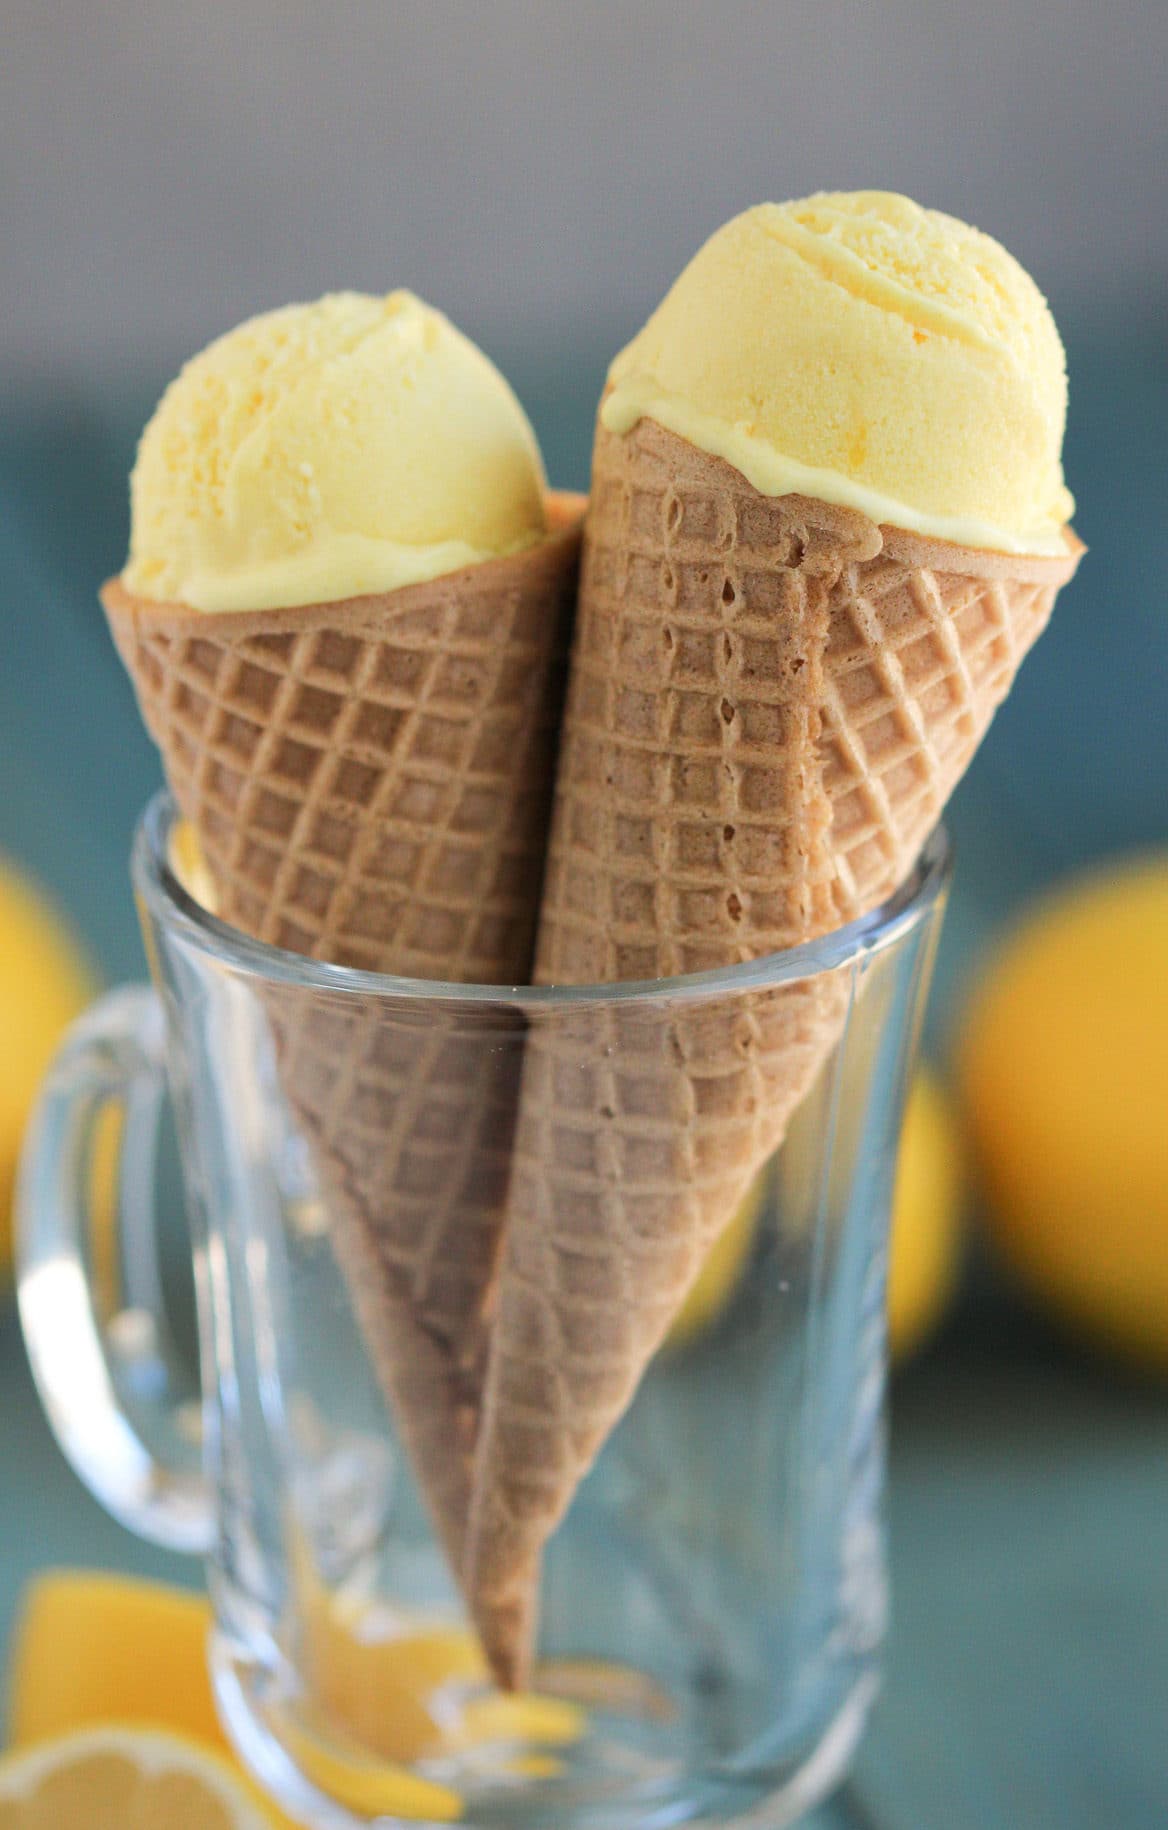 This Healthy Boozy Limoncello Frozen Yogurt recipe is creamy, tart, refreshing, and not overly sweet. It’s the perfect dessert for a delicious nightcap! You'd never know it's refined sugar free, fat free, low carb, high protein, and gluten free! Healthy Dessert Recipes at Desserts with Benefits